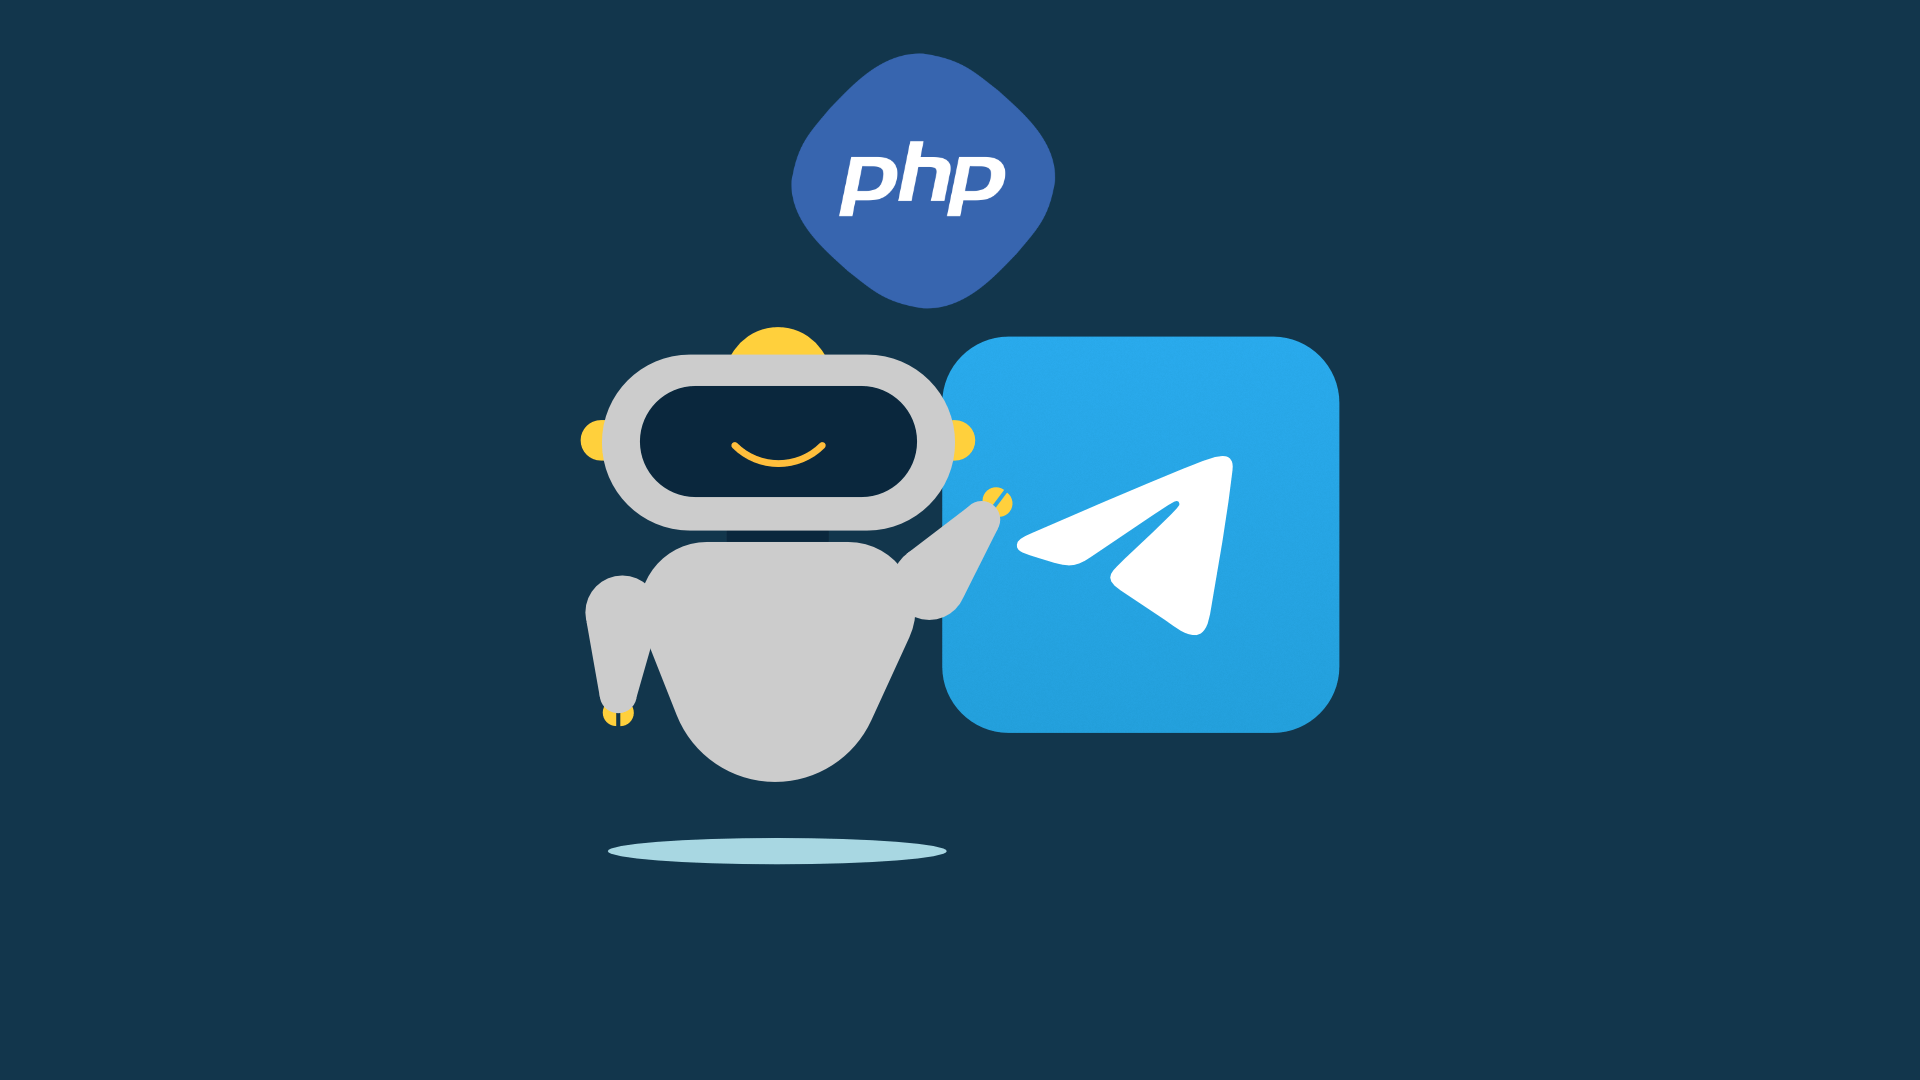 Telegram Bot And PHP To Send A Message?